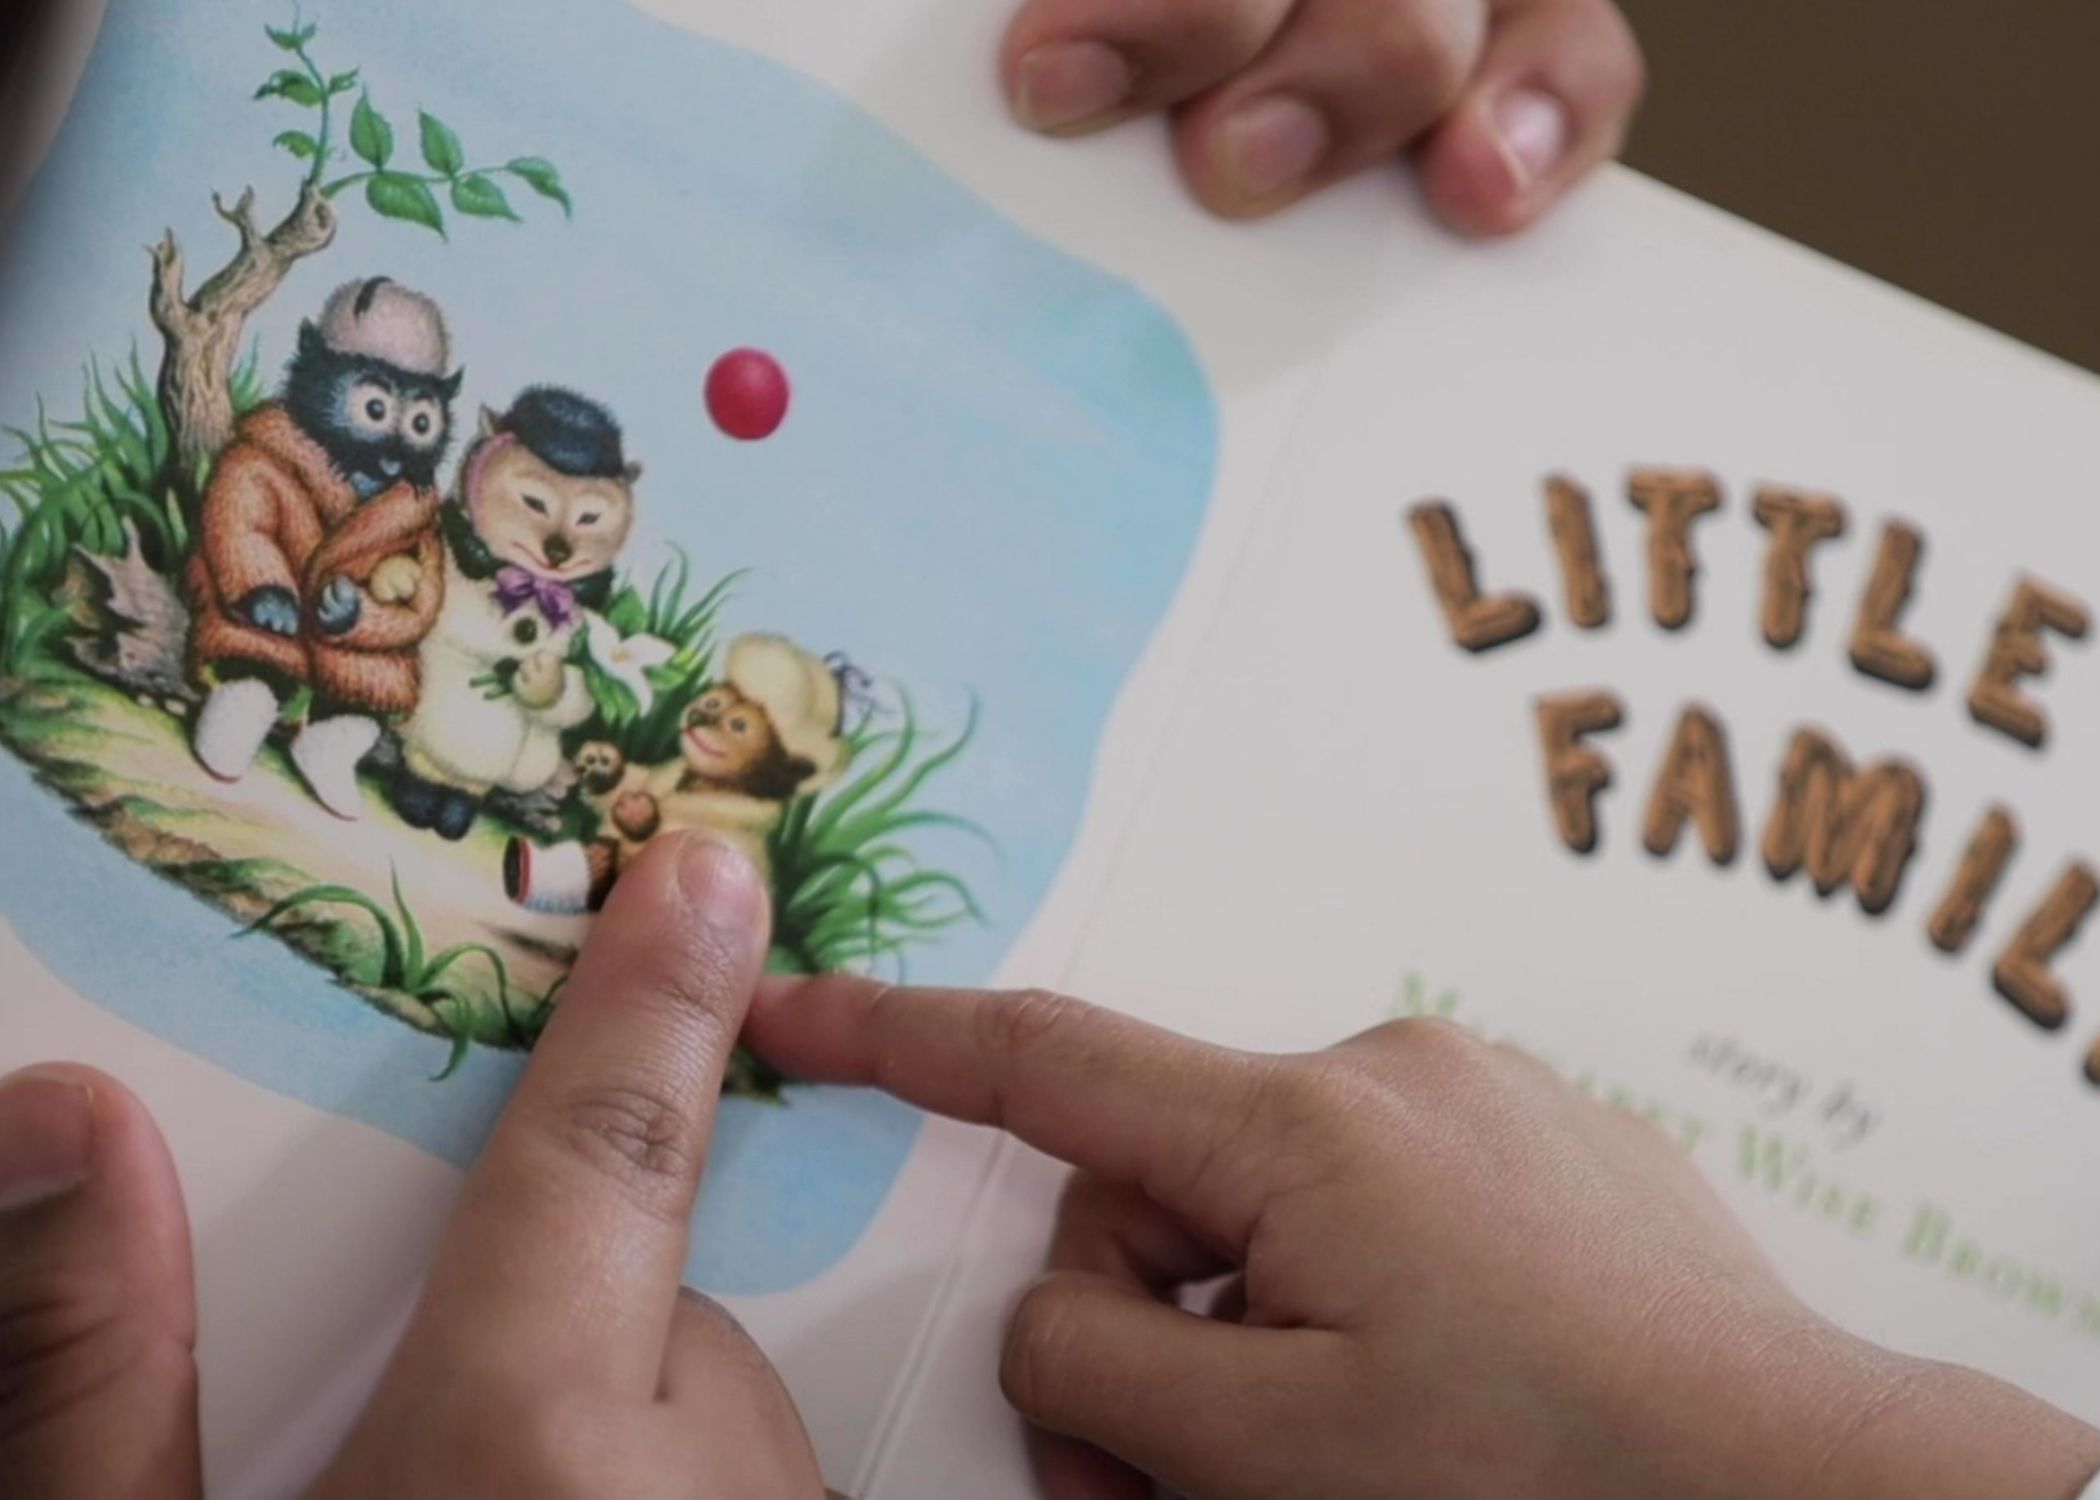 Adult and child hands pointing at a picture in a board book.